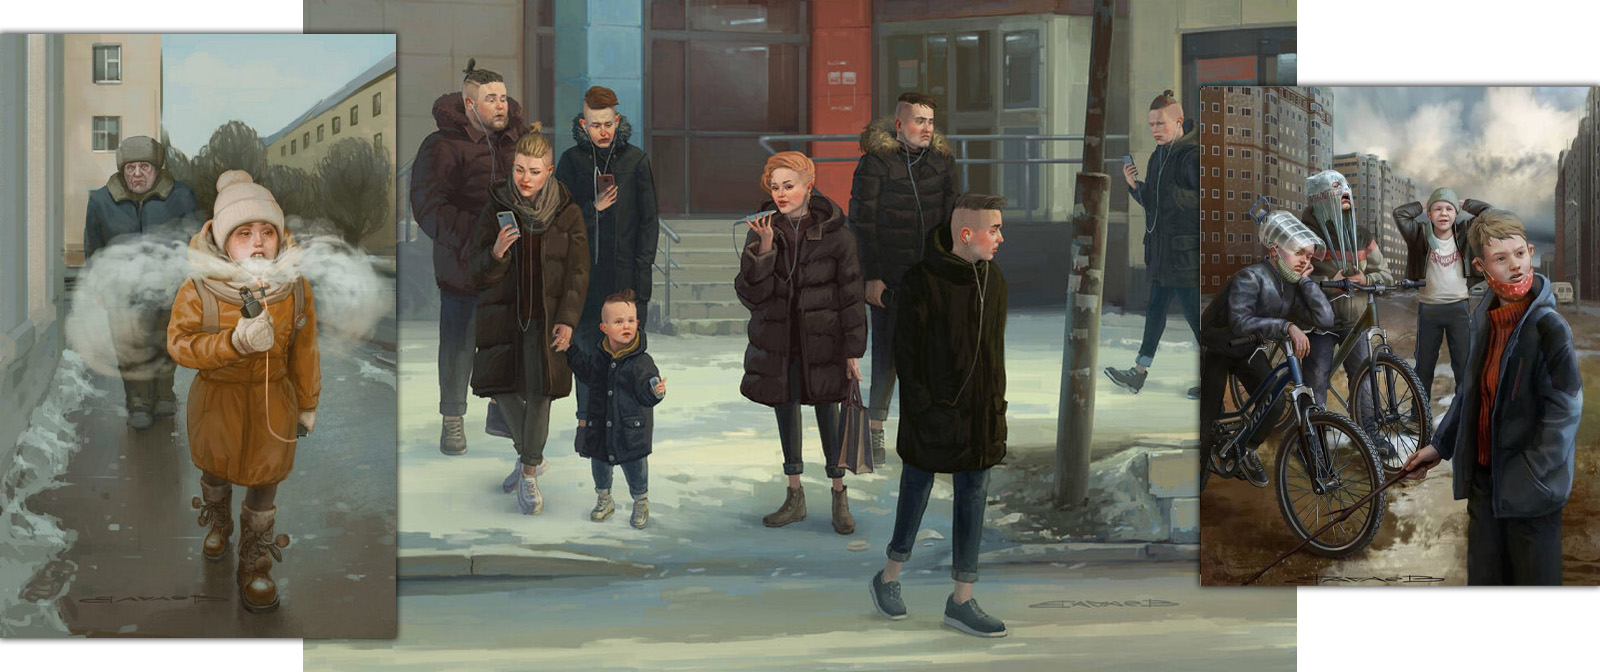 Ironic paintings by Mikhail Vachaev about our life, laced with irony and the grotesque